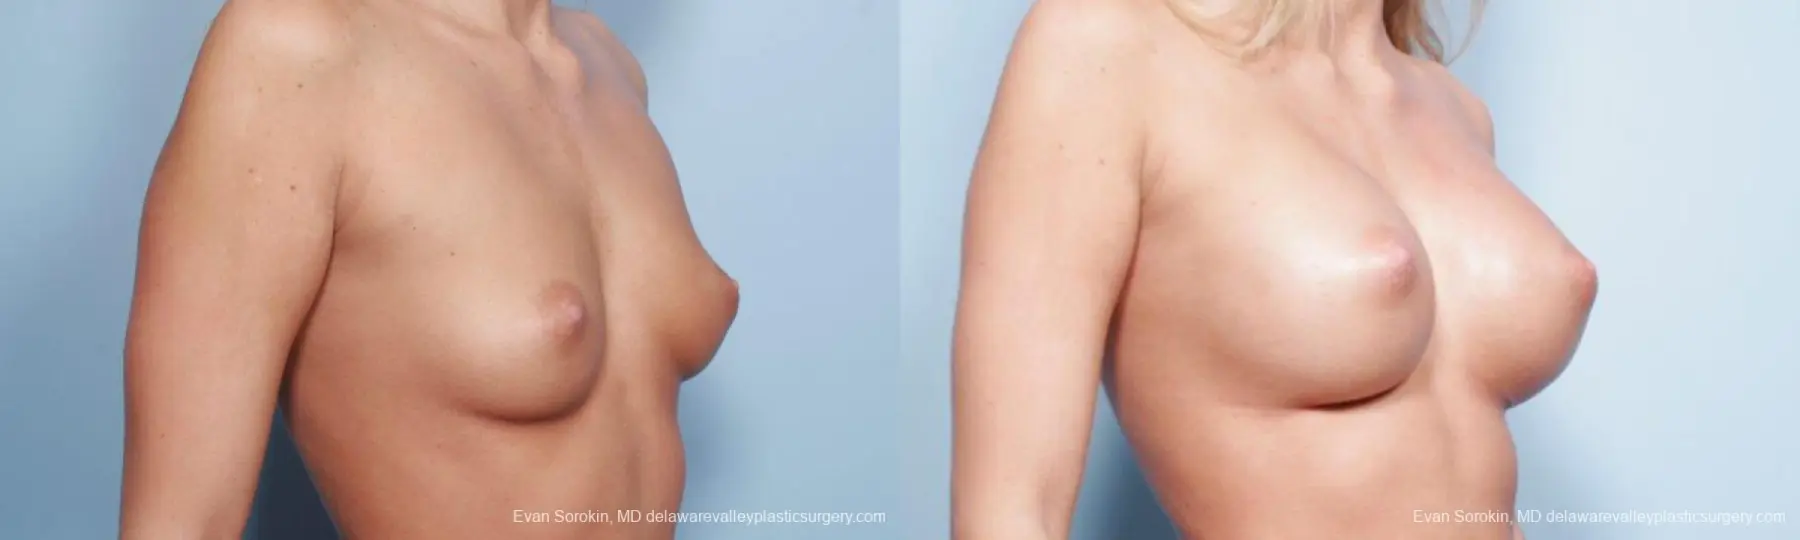 Philadelphia Breast Augmentation 9177 - Before and After 4